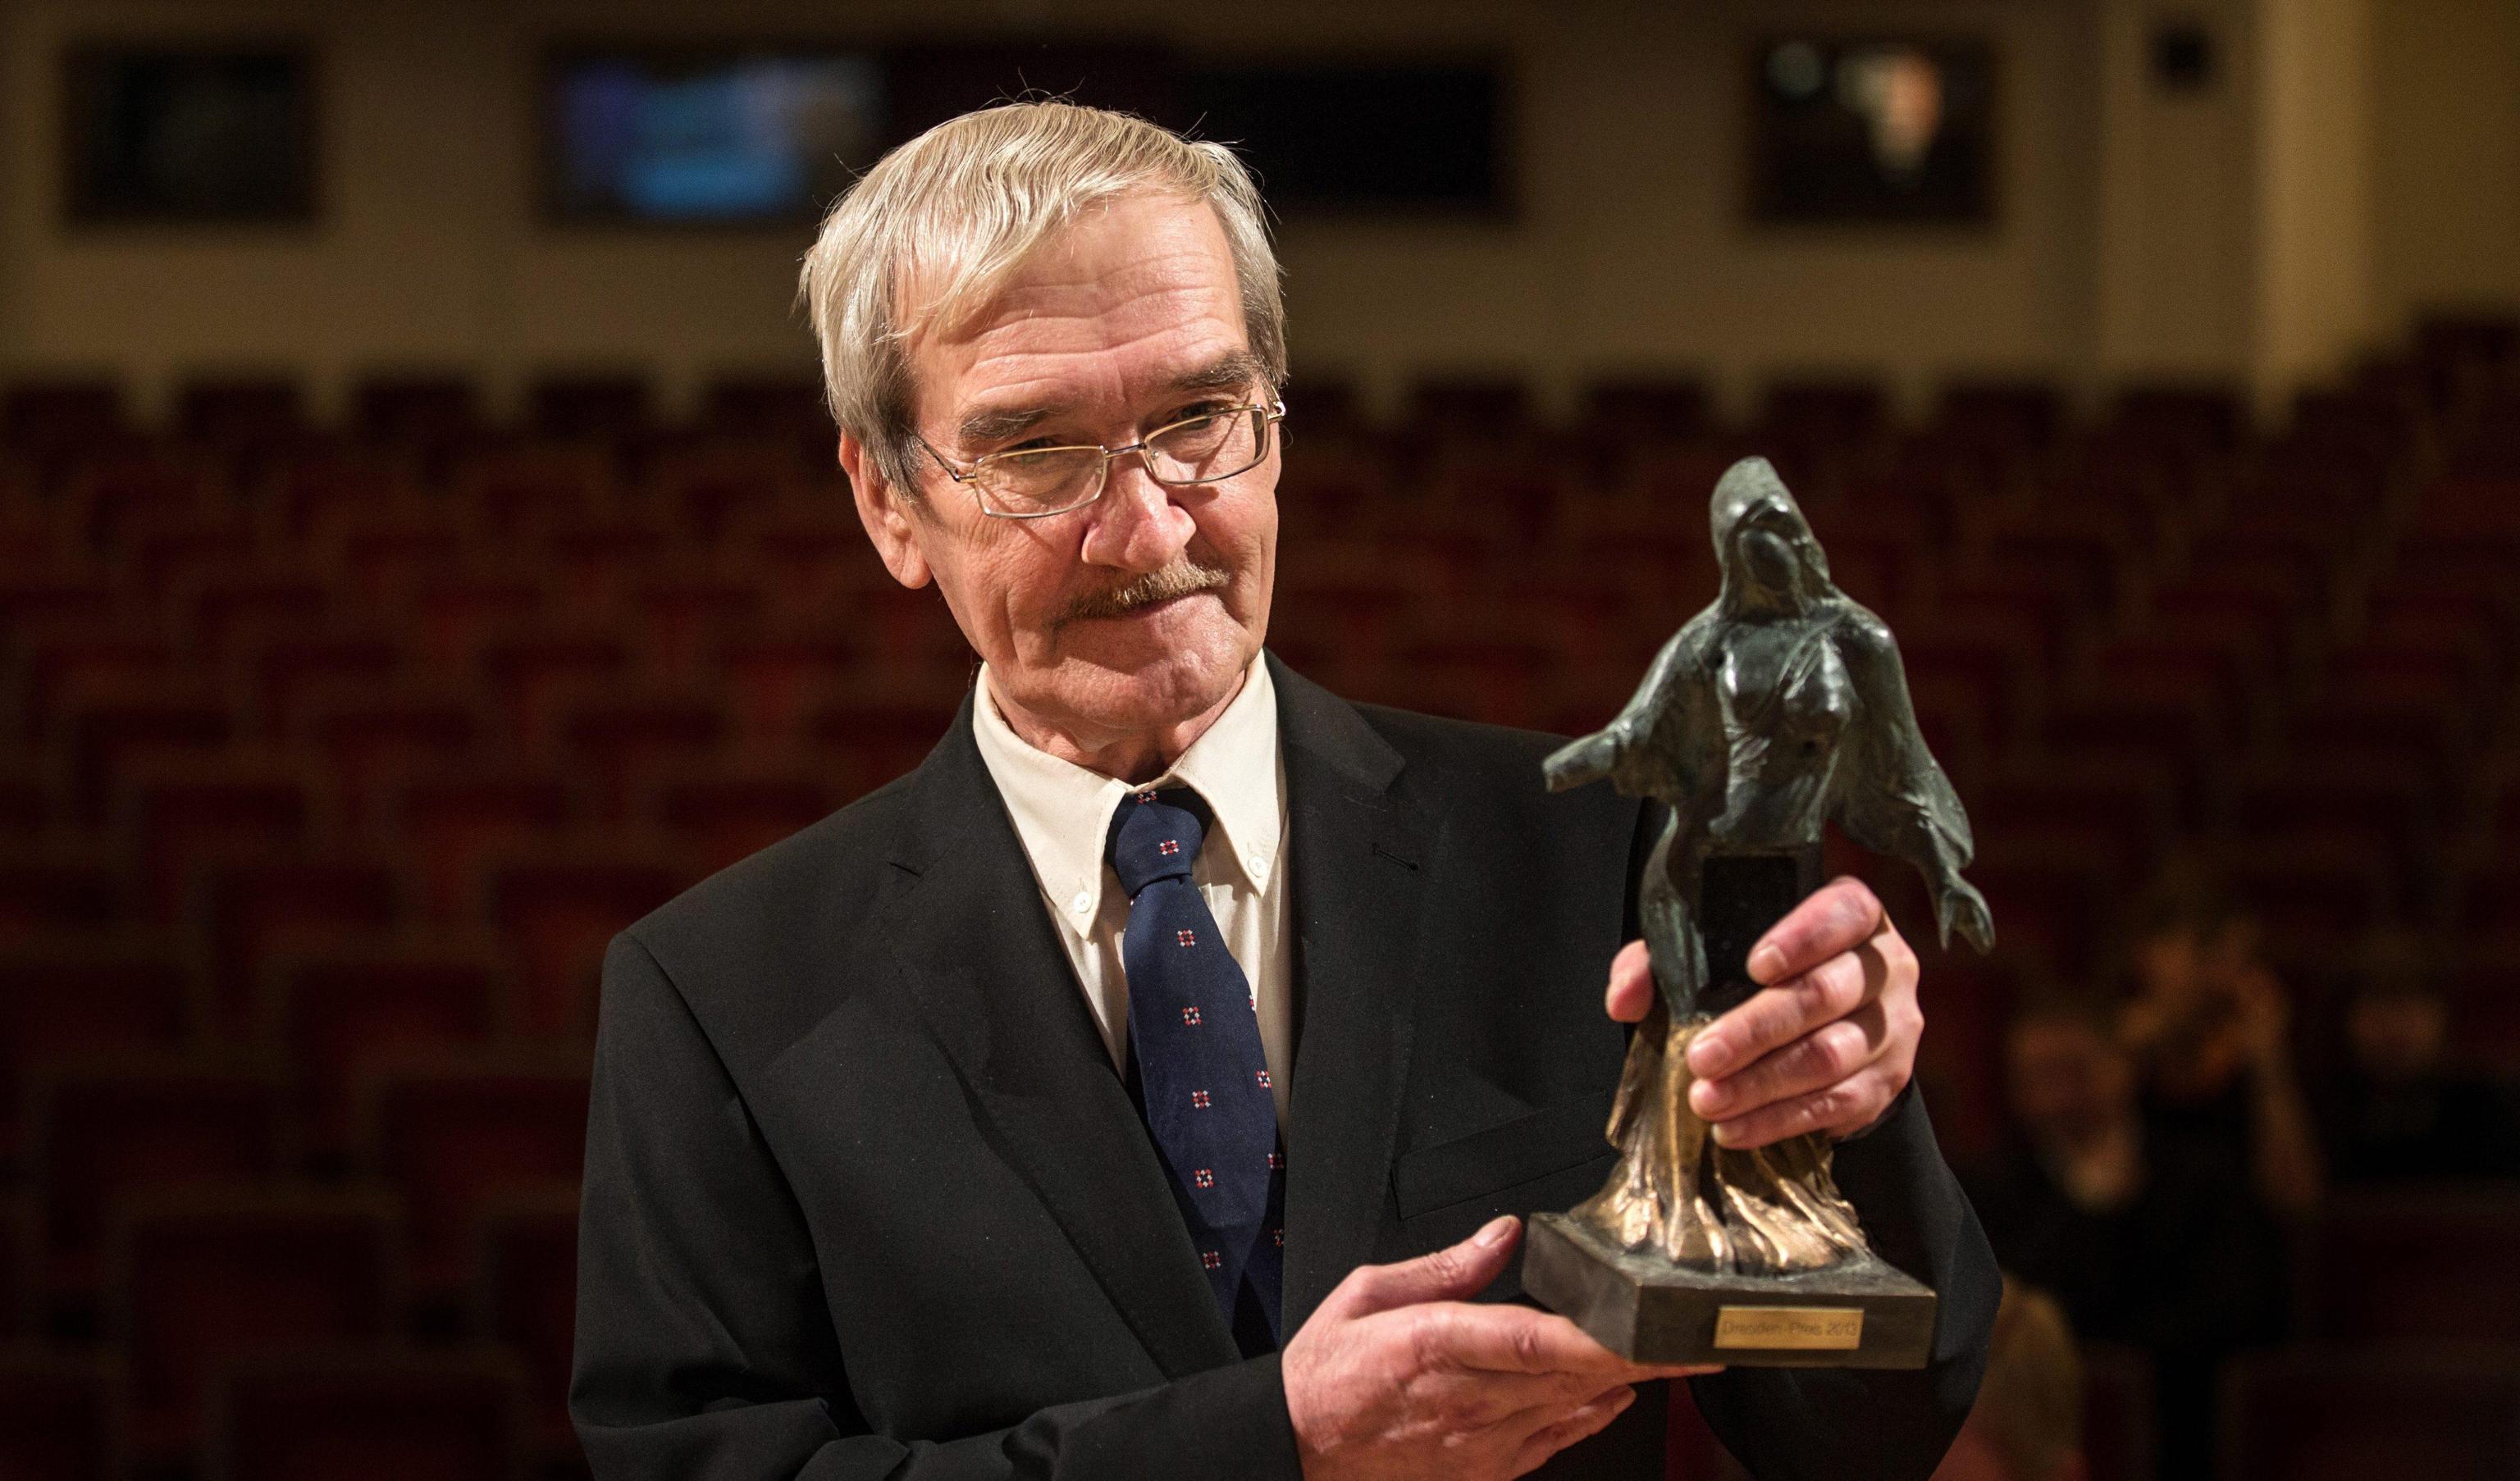 epa03588336 Former Soviet officer Stanislav Petrov holds the Dresden Prize at the Semper Opera, in Dresden, Germany, 17 February 2013. The prize presented by the organization Friends of Dresden is endowed with 25,000 euros. The 73-year-old former Russian soldier is credited with preventing a nuclear war on 26 September 1983. He judged an early warning system that erroneously detected a missile launch from the United States to be a false alarm and thereby is thought to have averted a nuclear holocaust.  EPA/OLIVER KILLIG